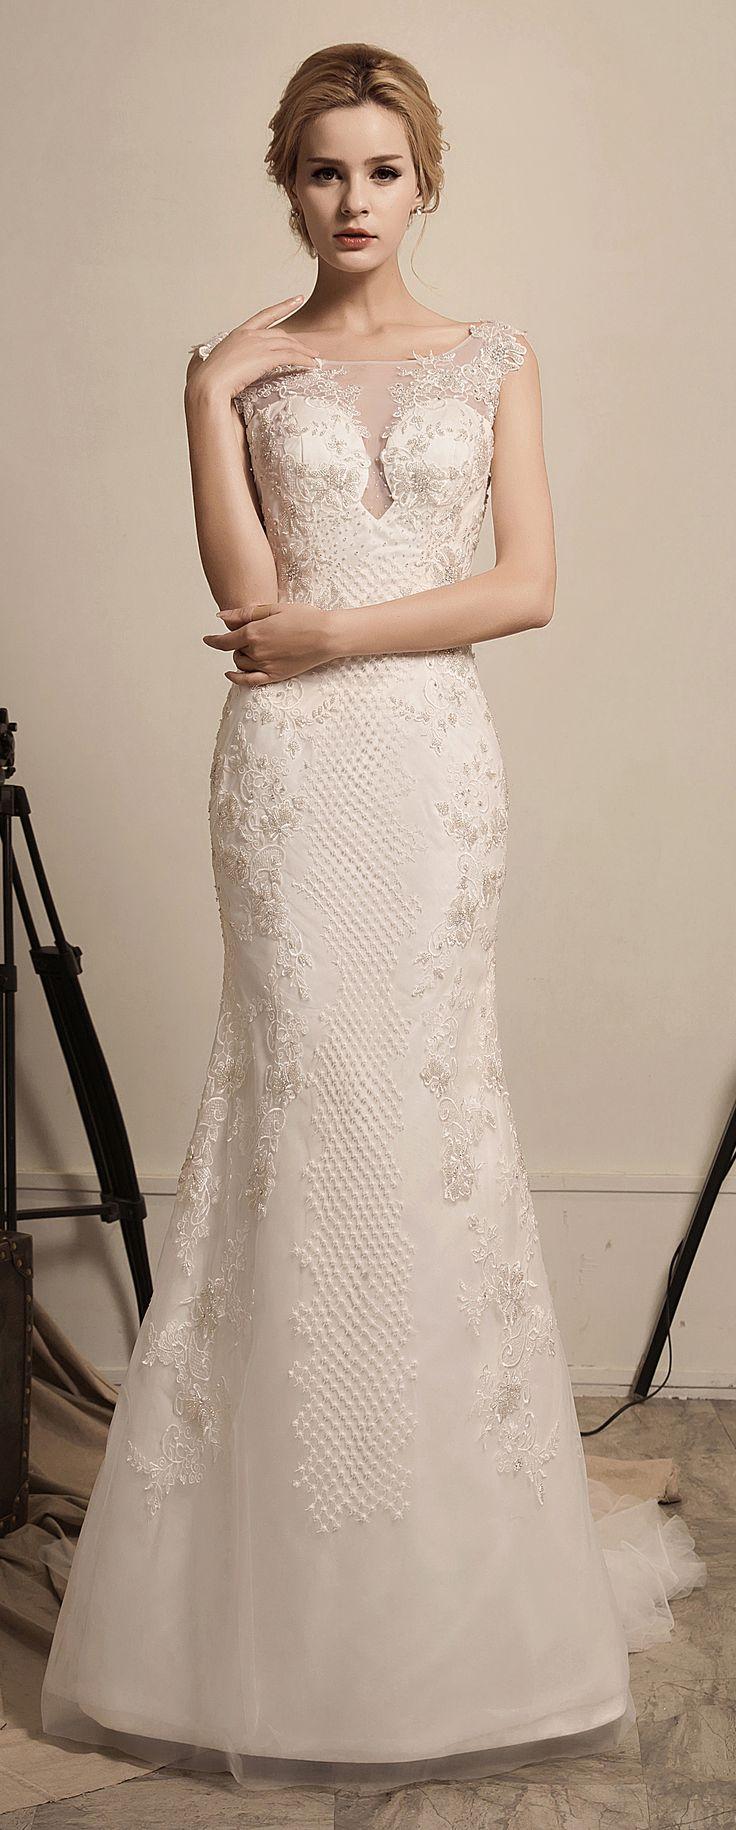 Wedding - Fairy Queen - Selena Huan Tank Silver Water Soluble Lace Beaded Sheath Gown With Detachable Layered Train